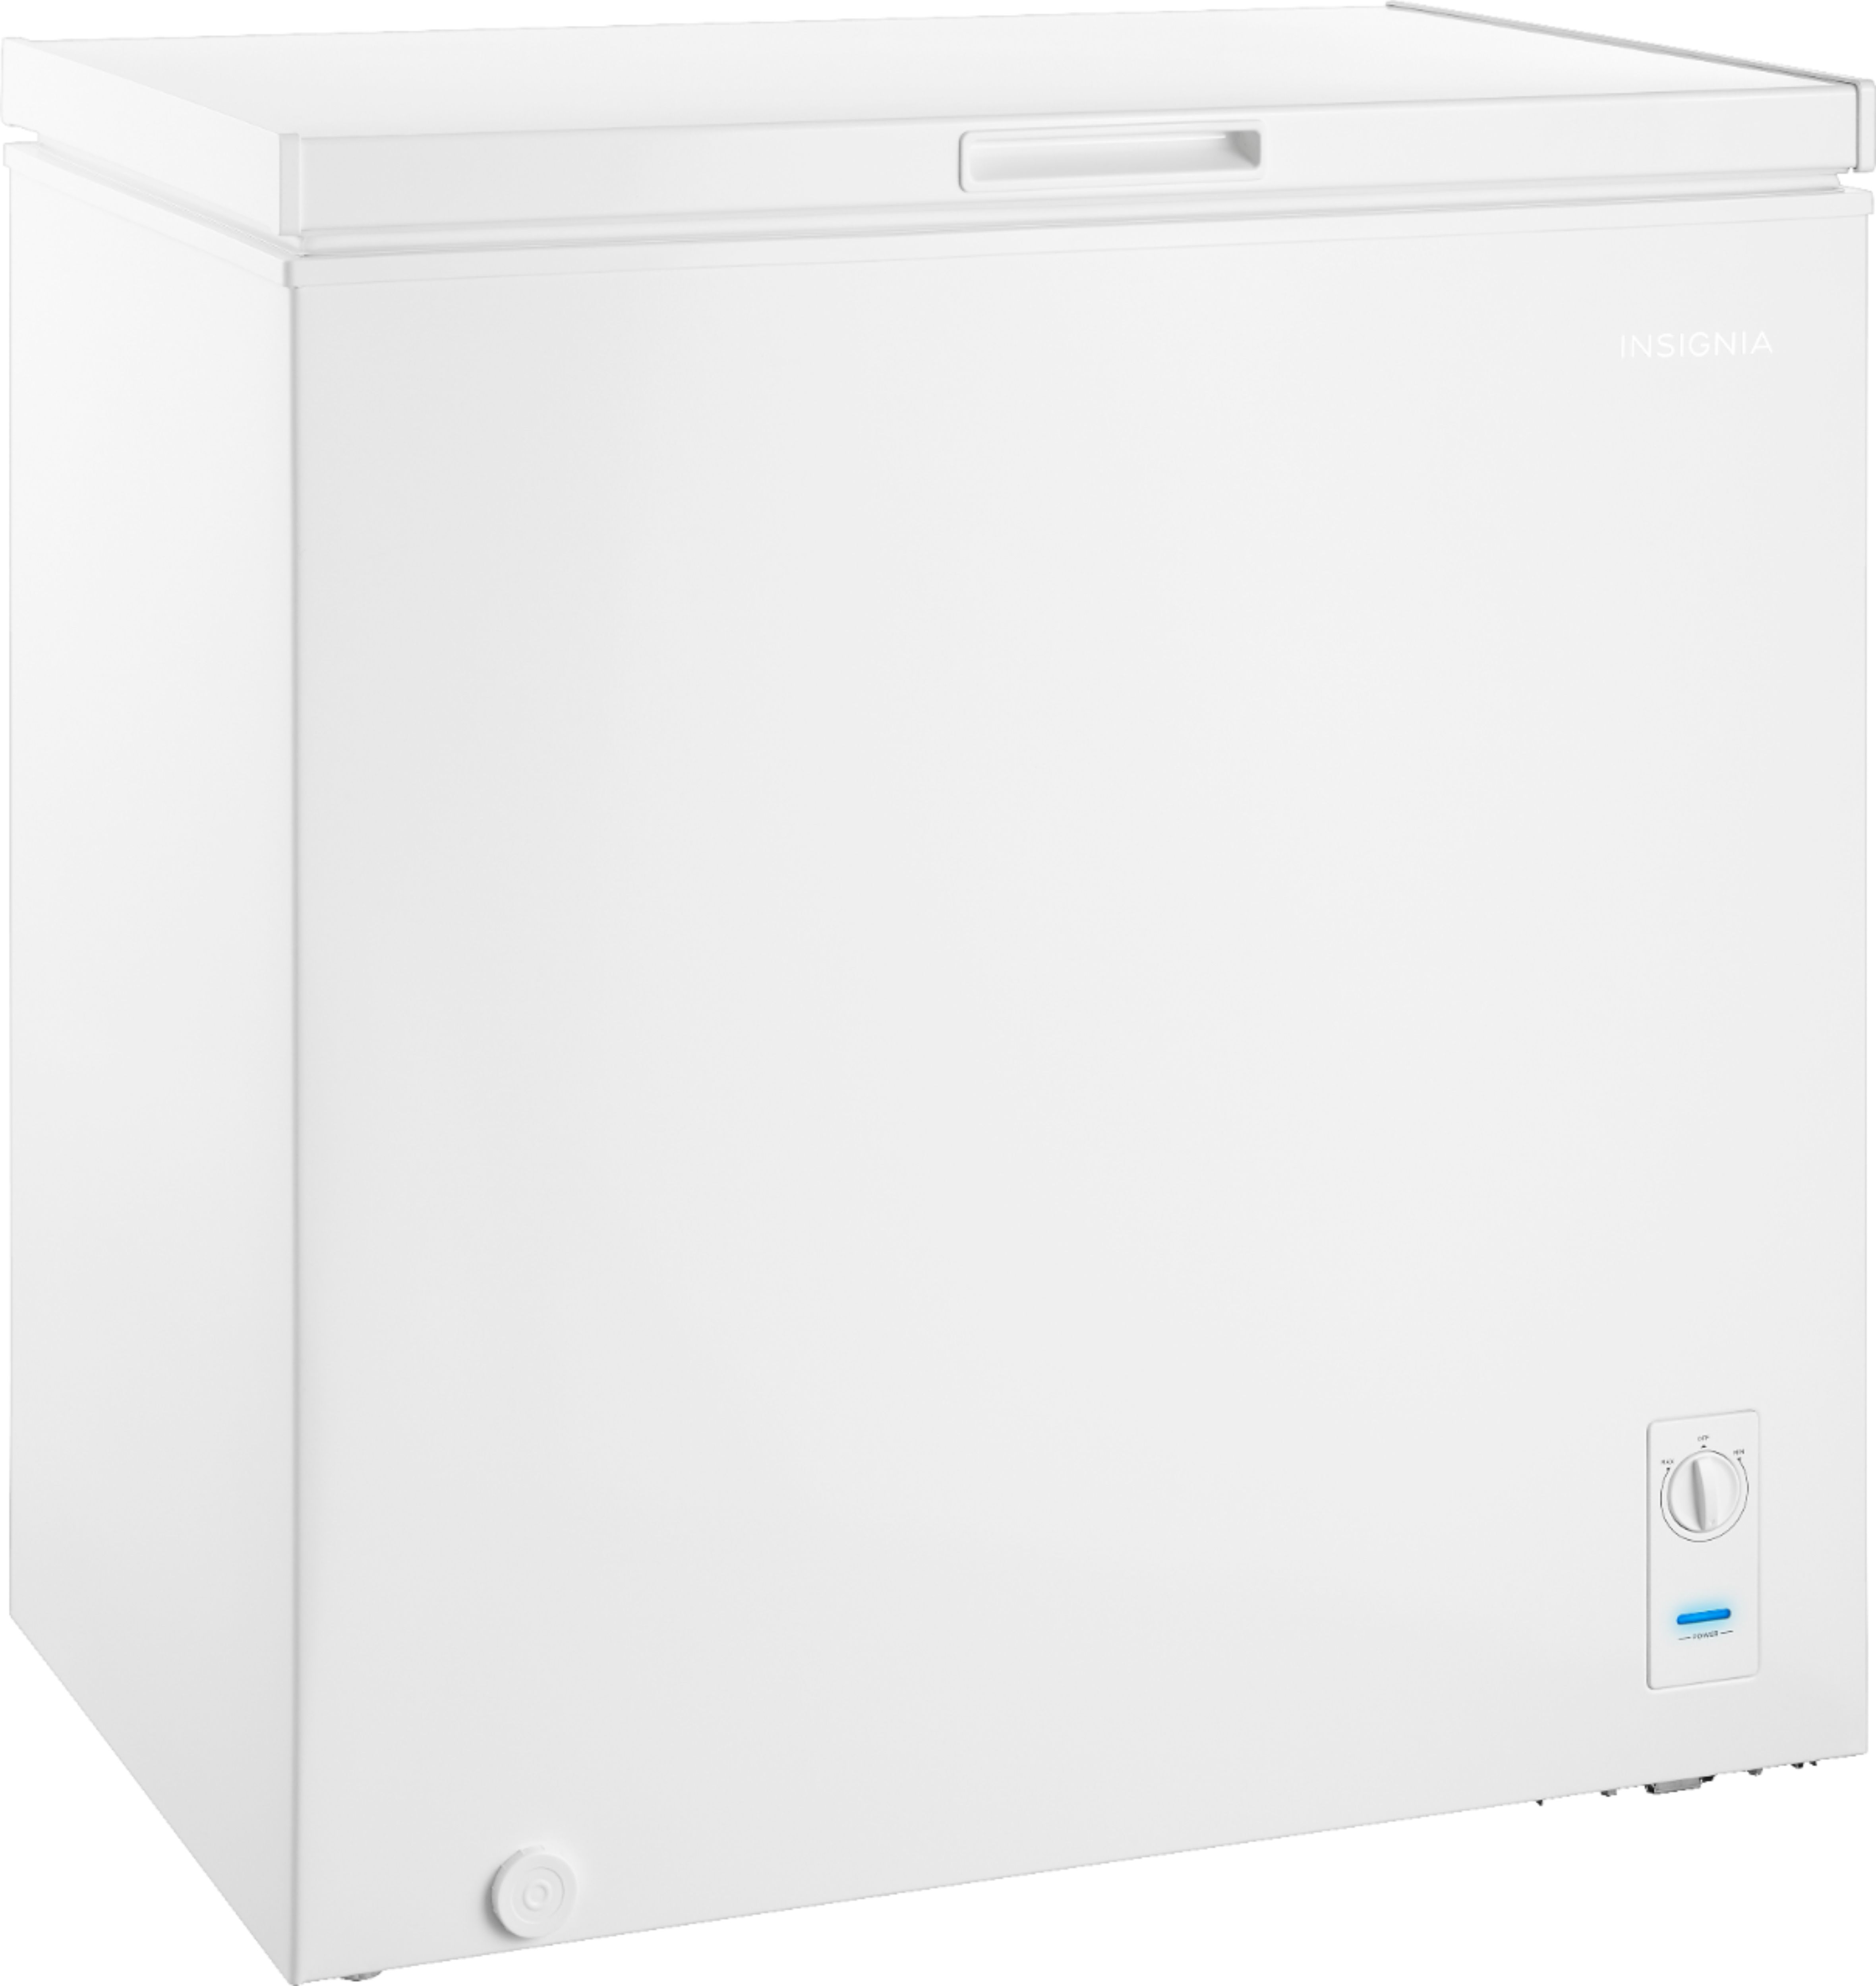 Angle View: Viking - Professional 7 Series 8.4 Cu. Ft. Upright Freezer with Interior Light - Arctic gray